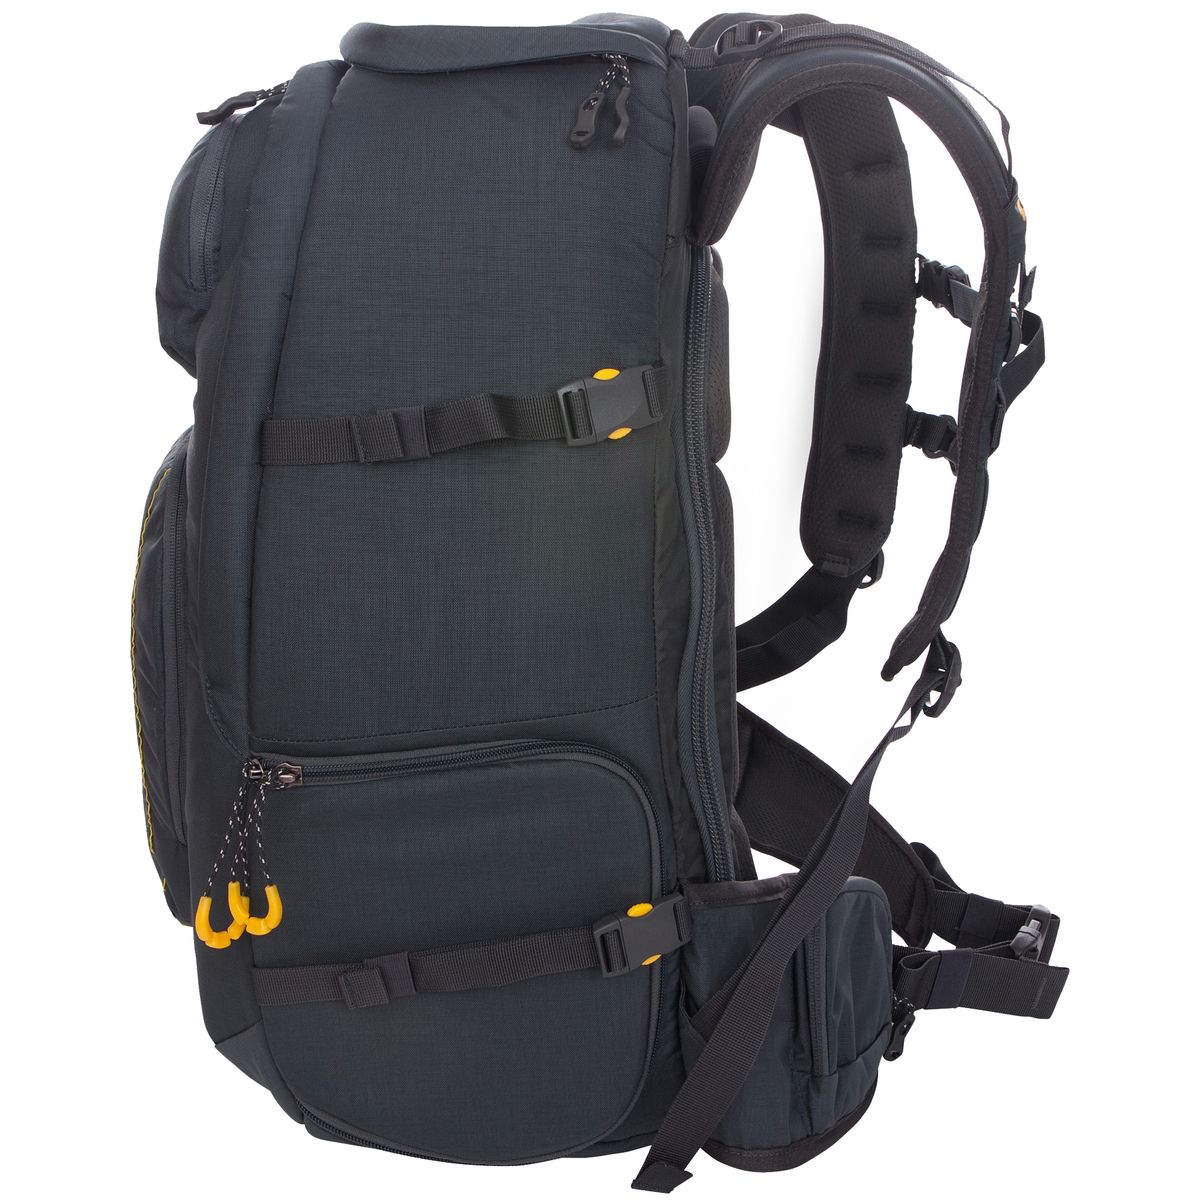 Mountainsmith Parallax Camera Backpack - 1880cu in | eBay